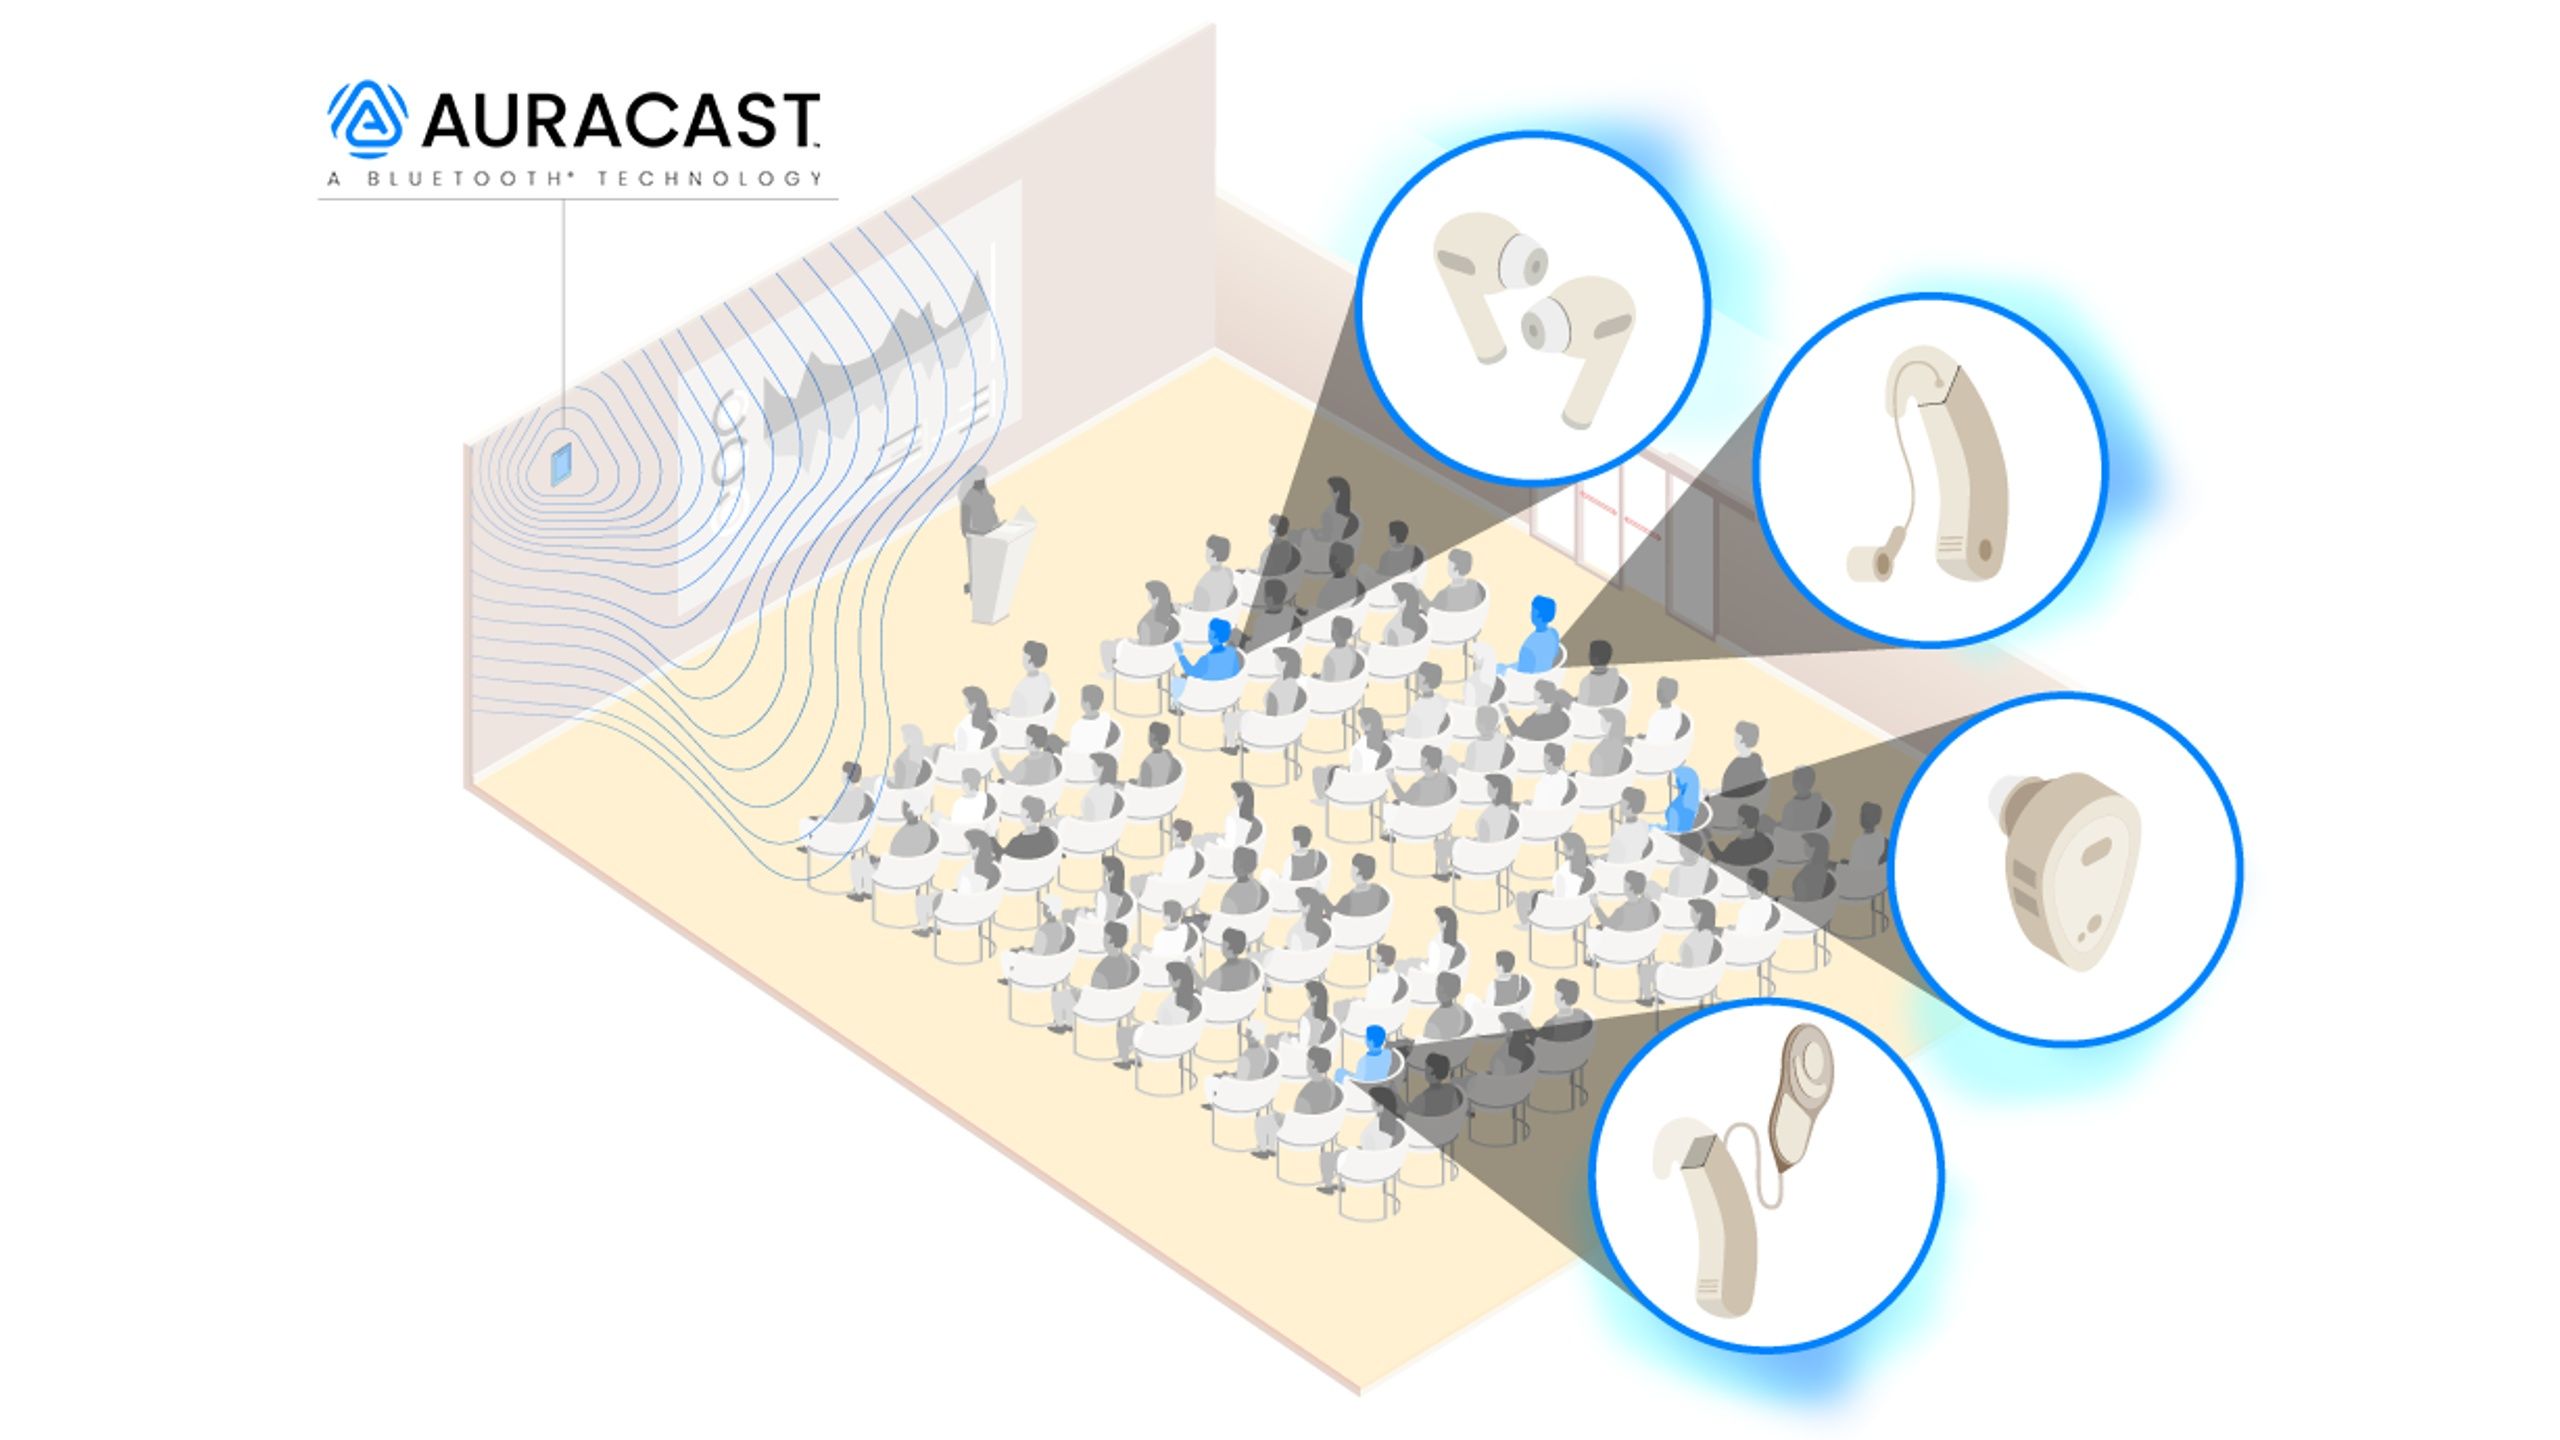 Hearing aids are able to tap into different Auracast streams broadcast to a certain area.